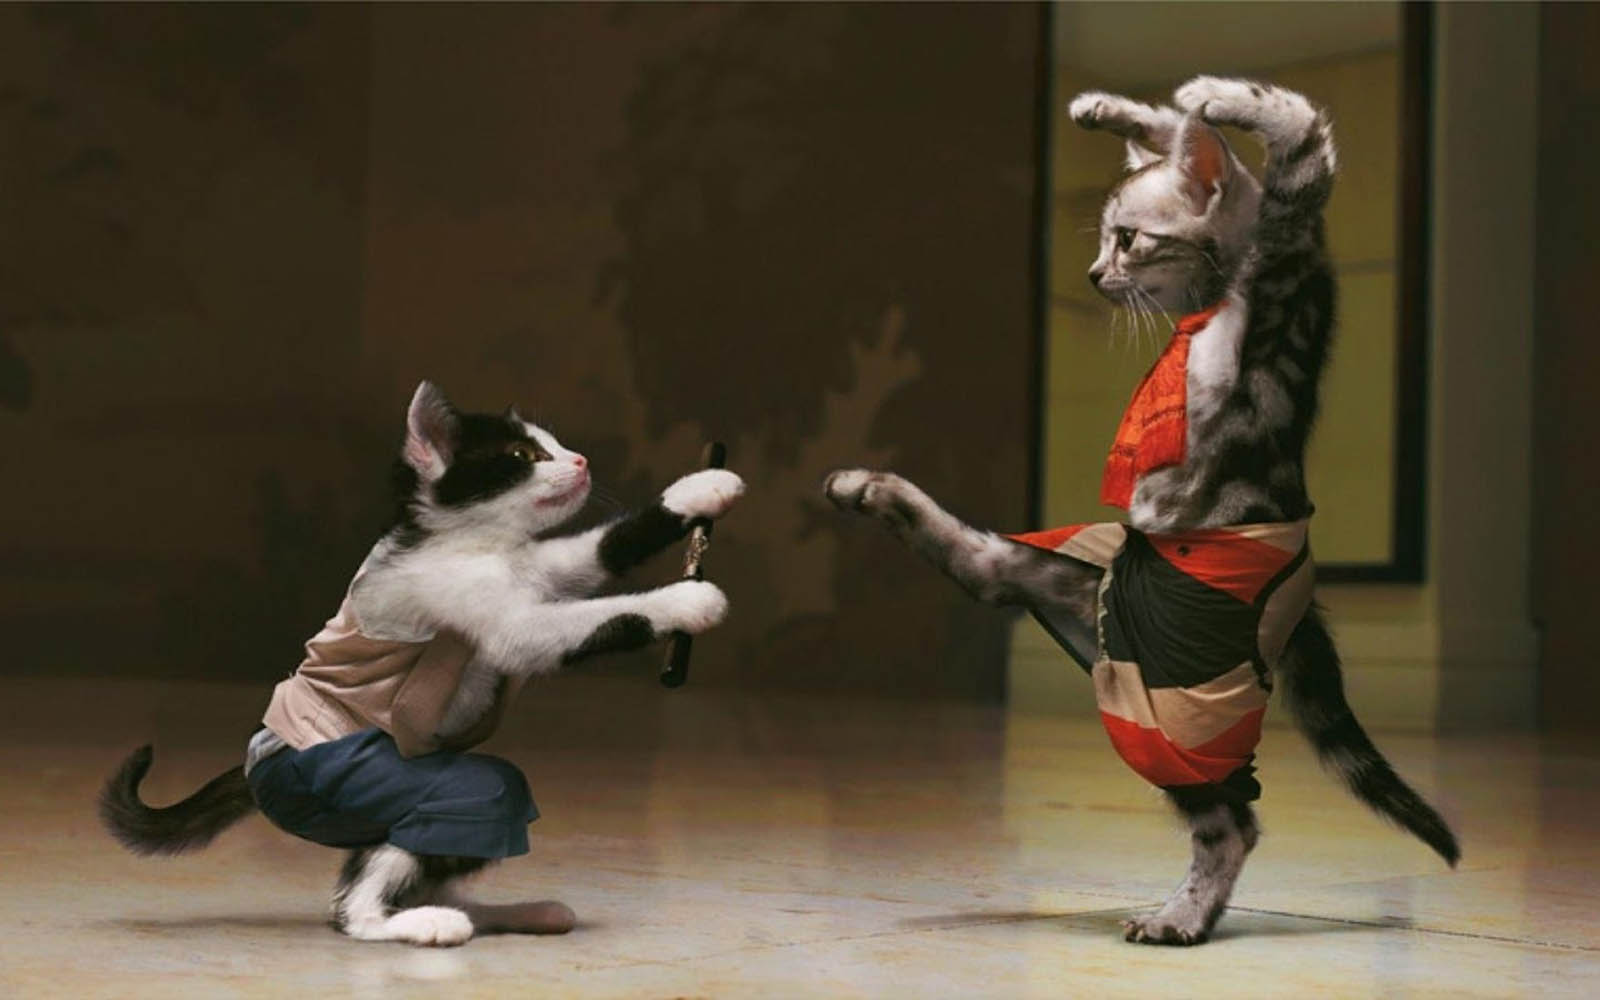 Tag Funny Cats Fight Wallpaper Background Photo Image And Picture